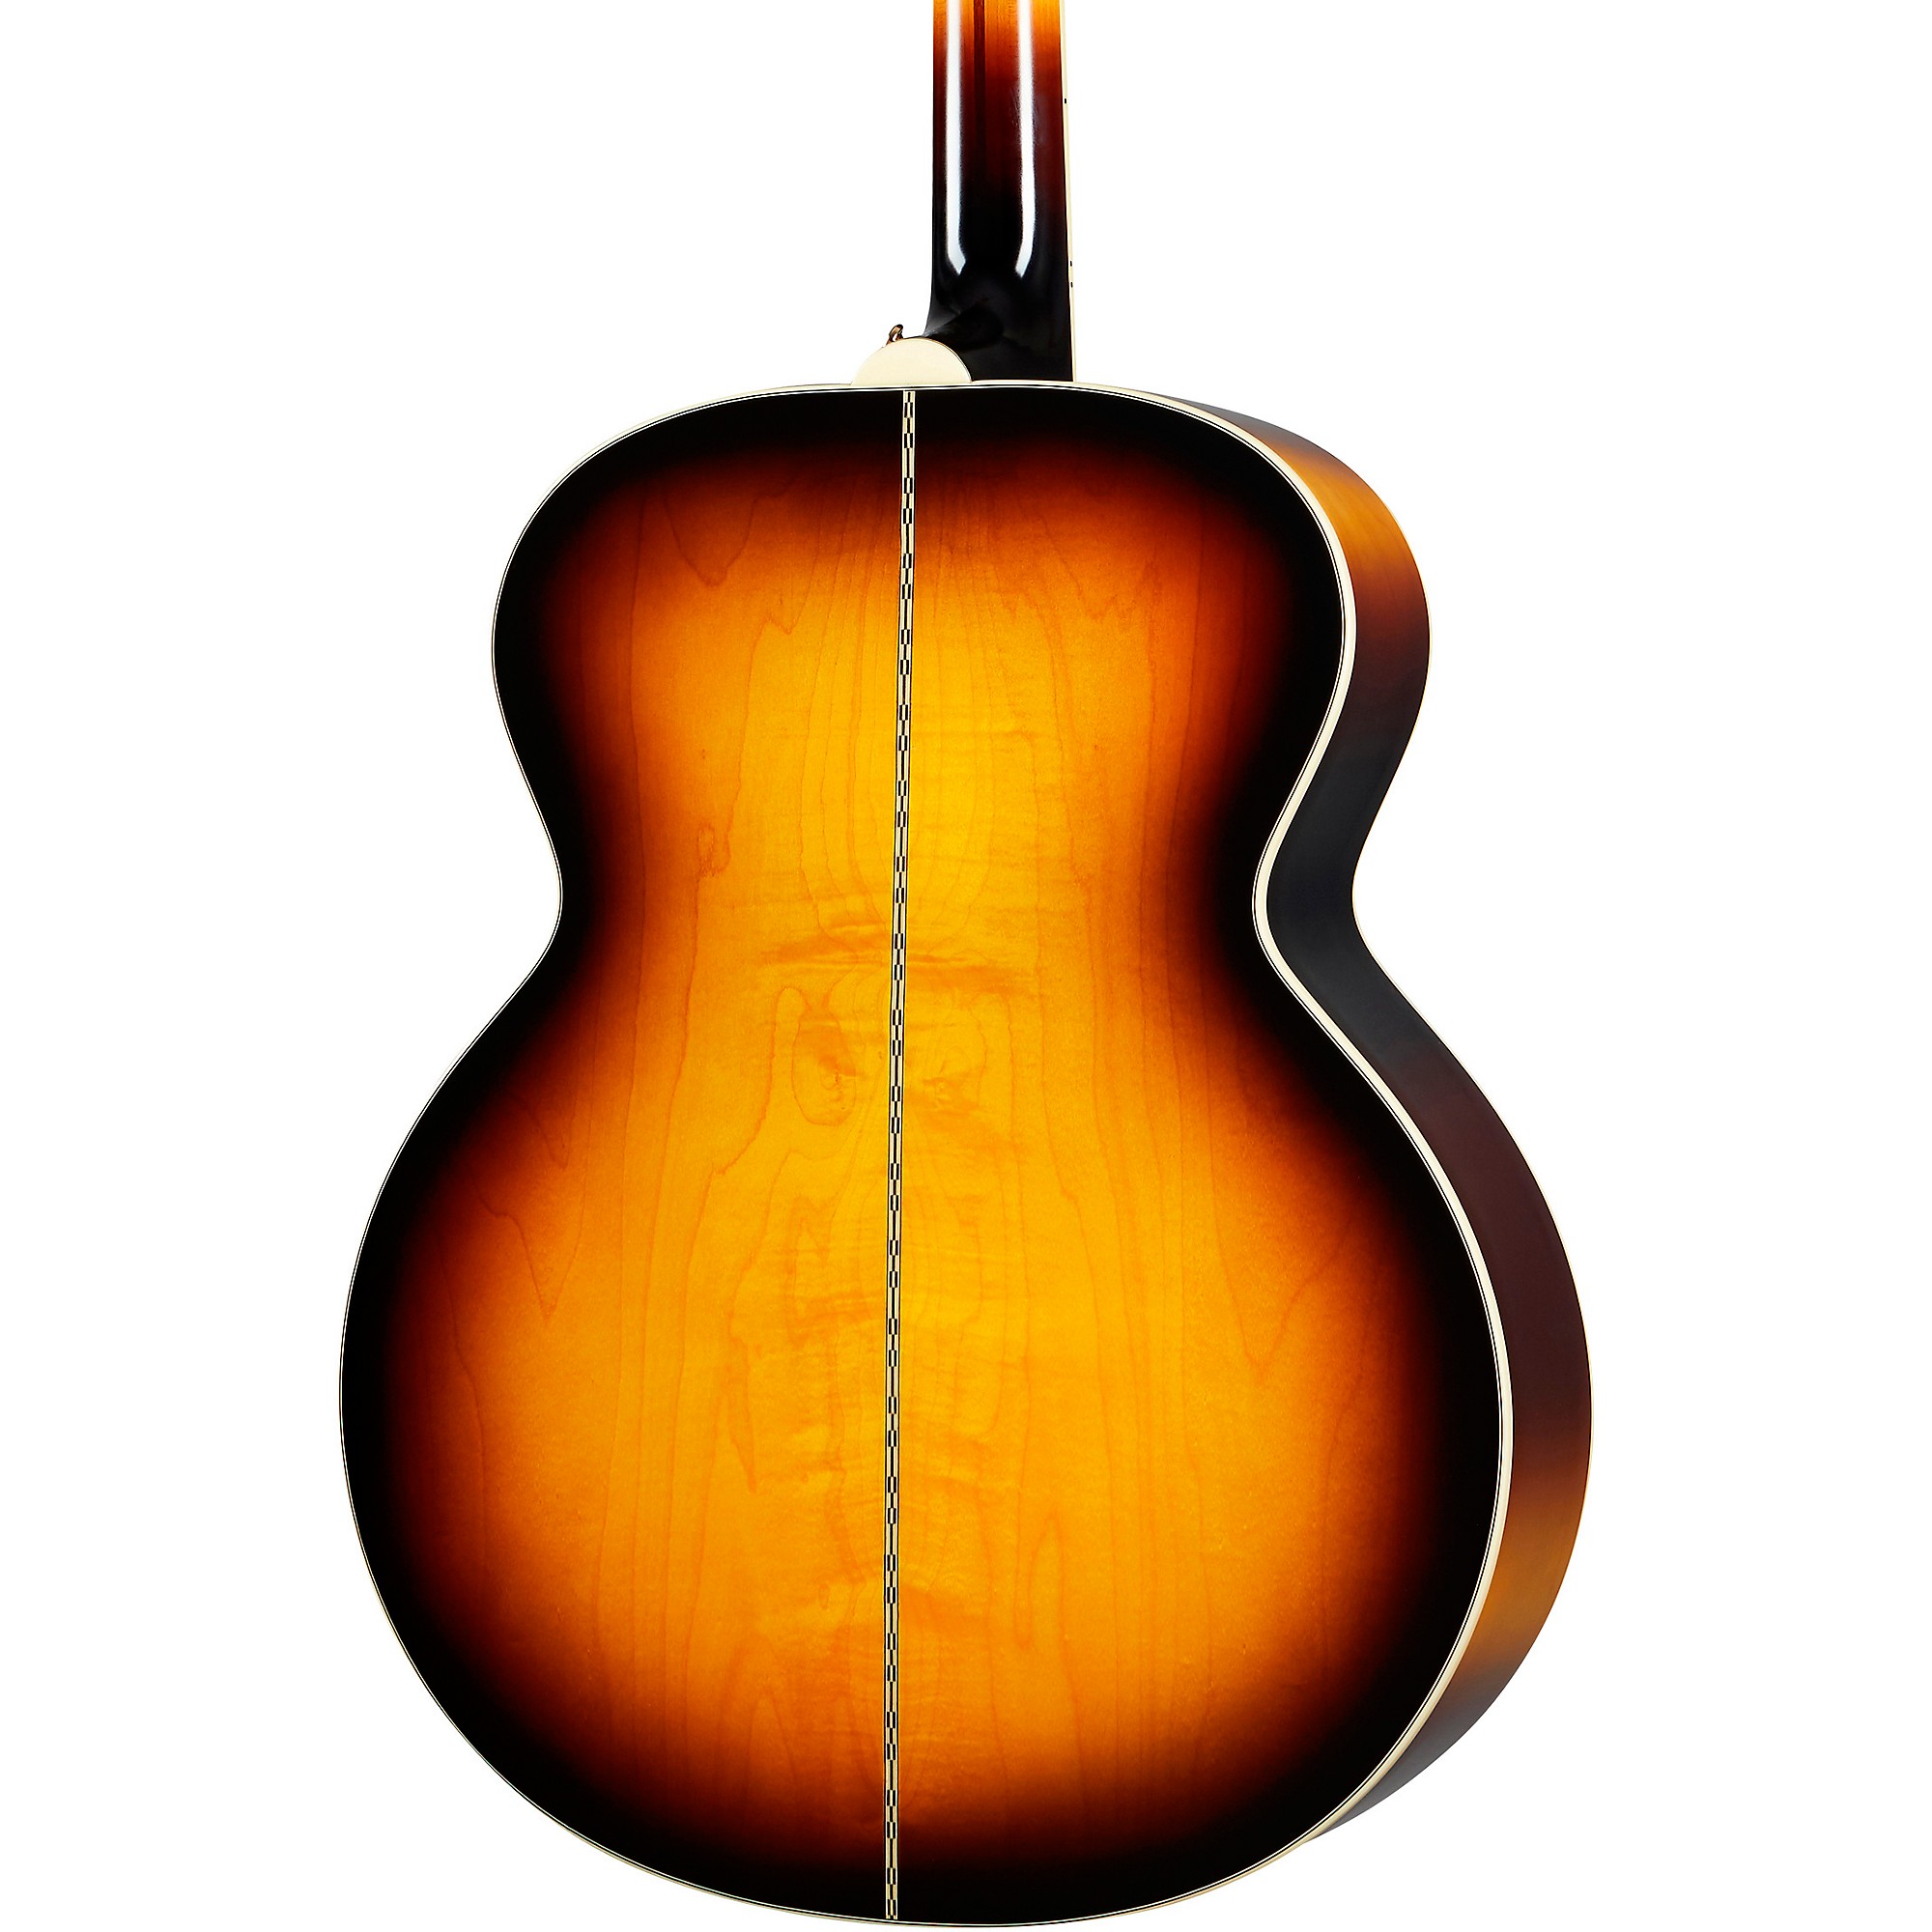 Epiphone Inspired by Gibson J-200 Acoustic-Electric Guitar Aged